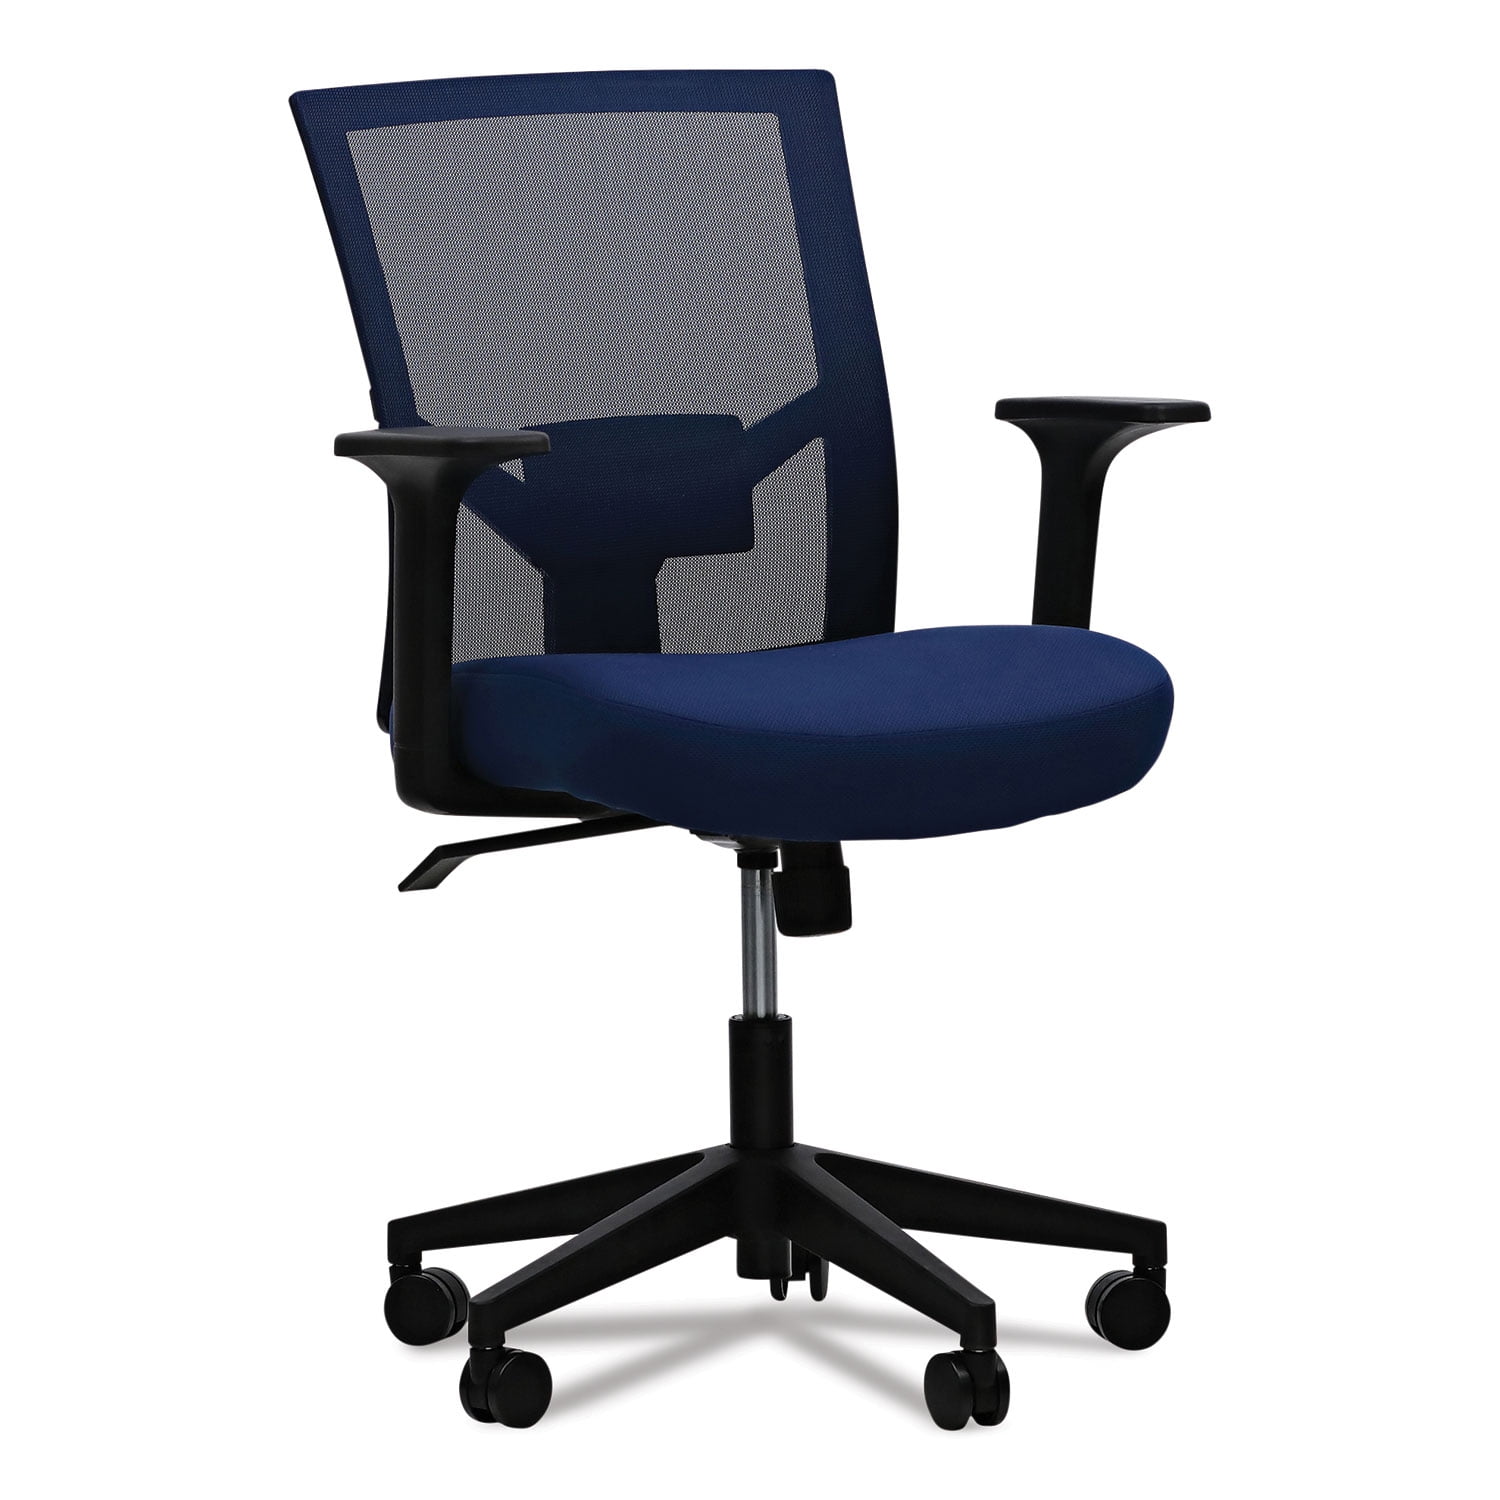 Alera®Alera Wrigley Series High Performance High-Back Synchro-Tilt Task  Chair, Supports 275 lb, 17.24″ to 20.55″ Seat Height, Black – Alera Details